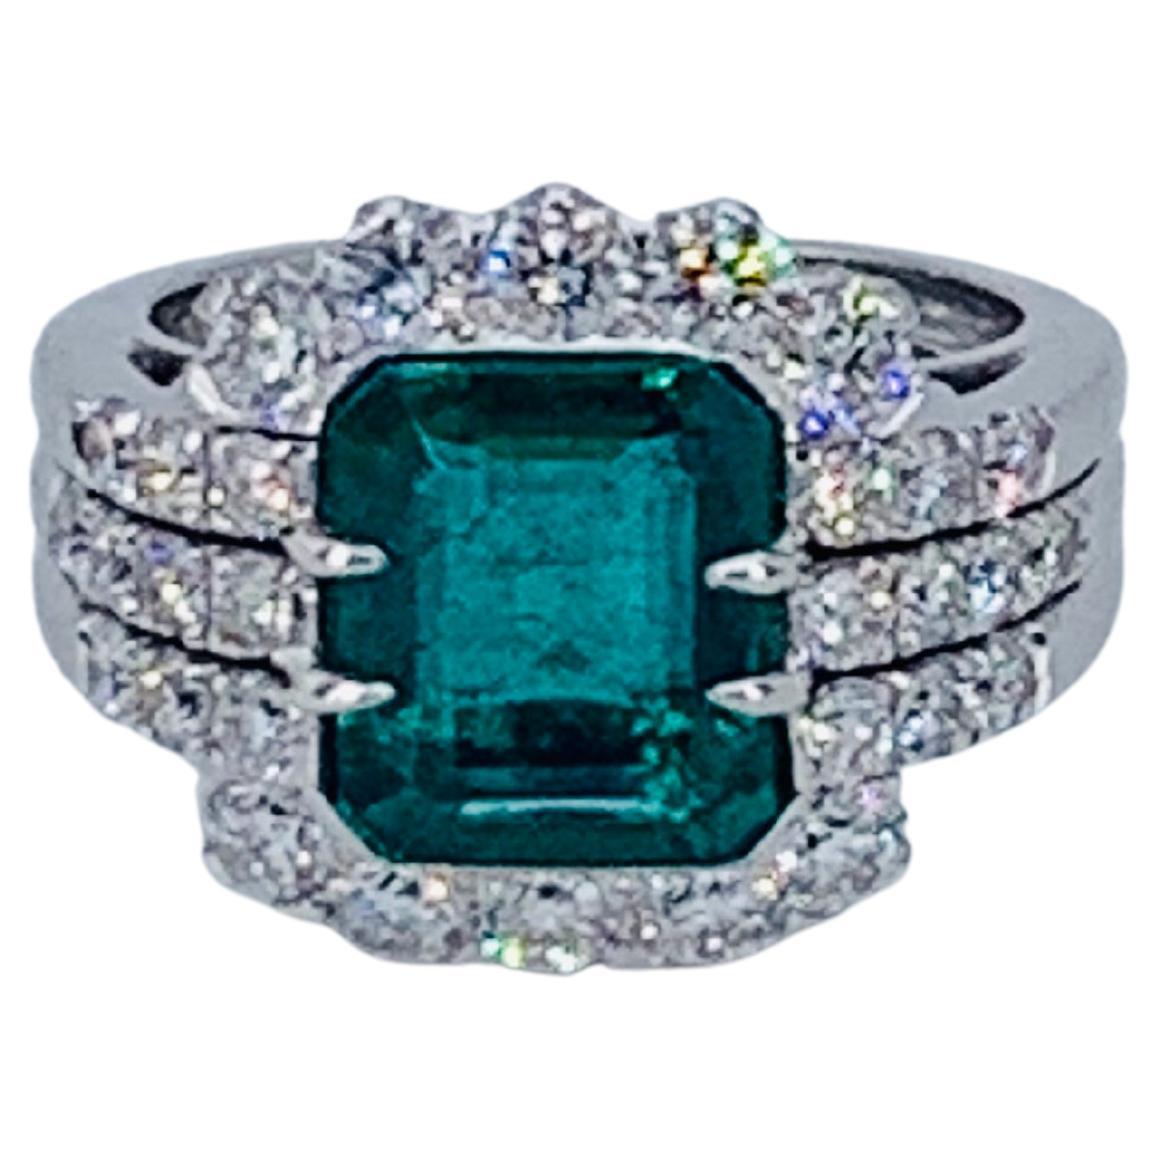 5.66 Carat Colombian Emerald Floral Designed Diamond Cocktail Ring For Sale